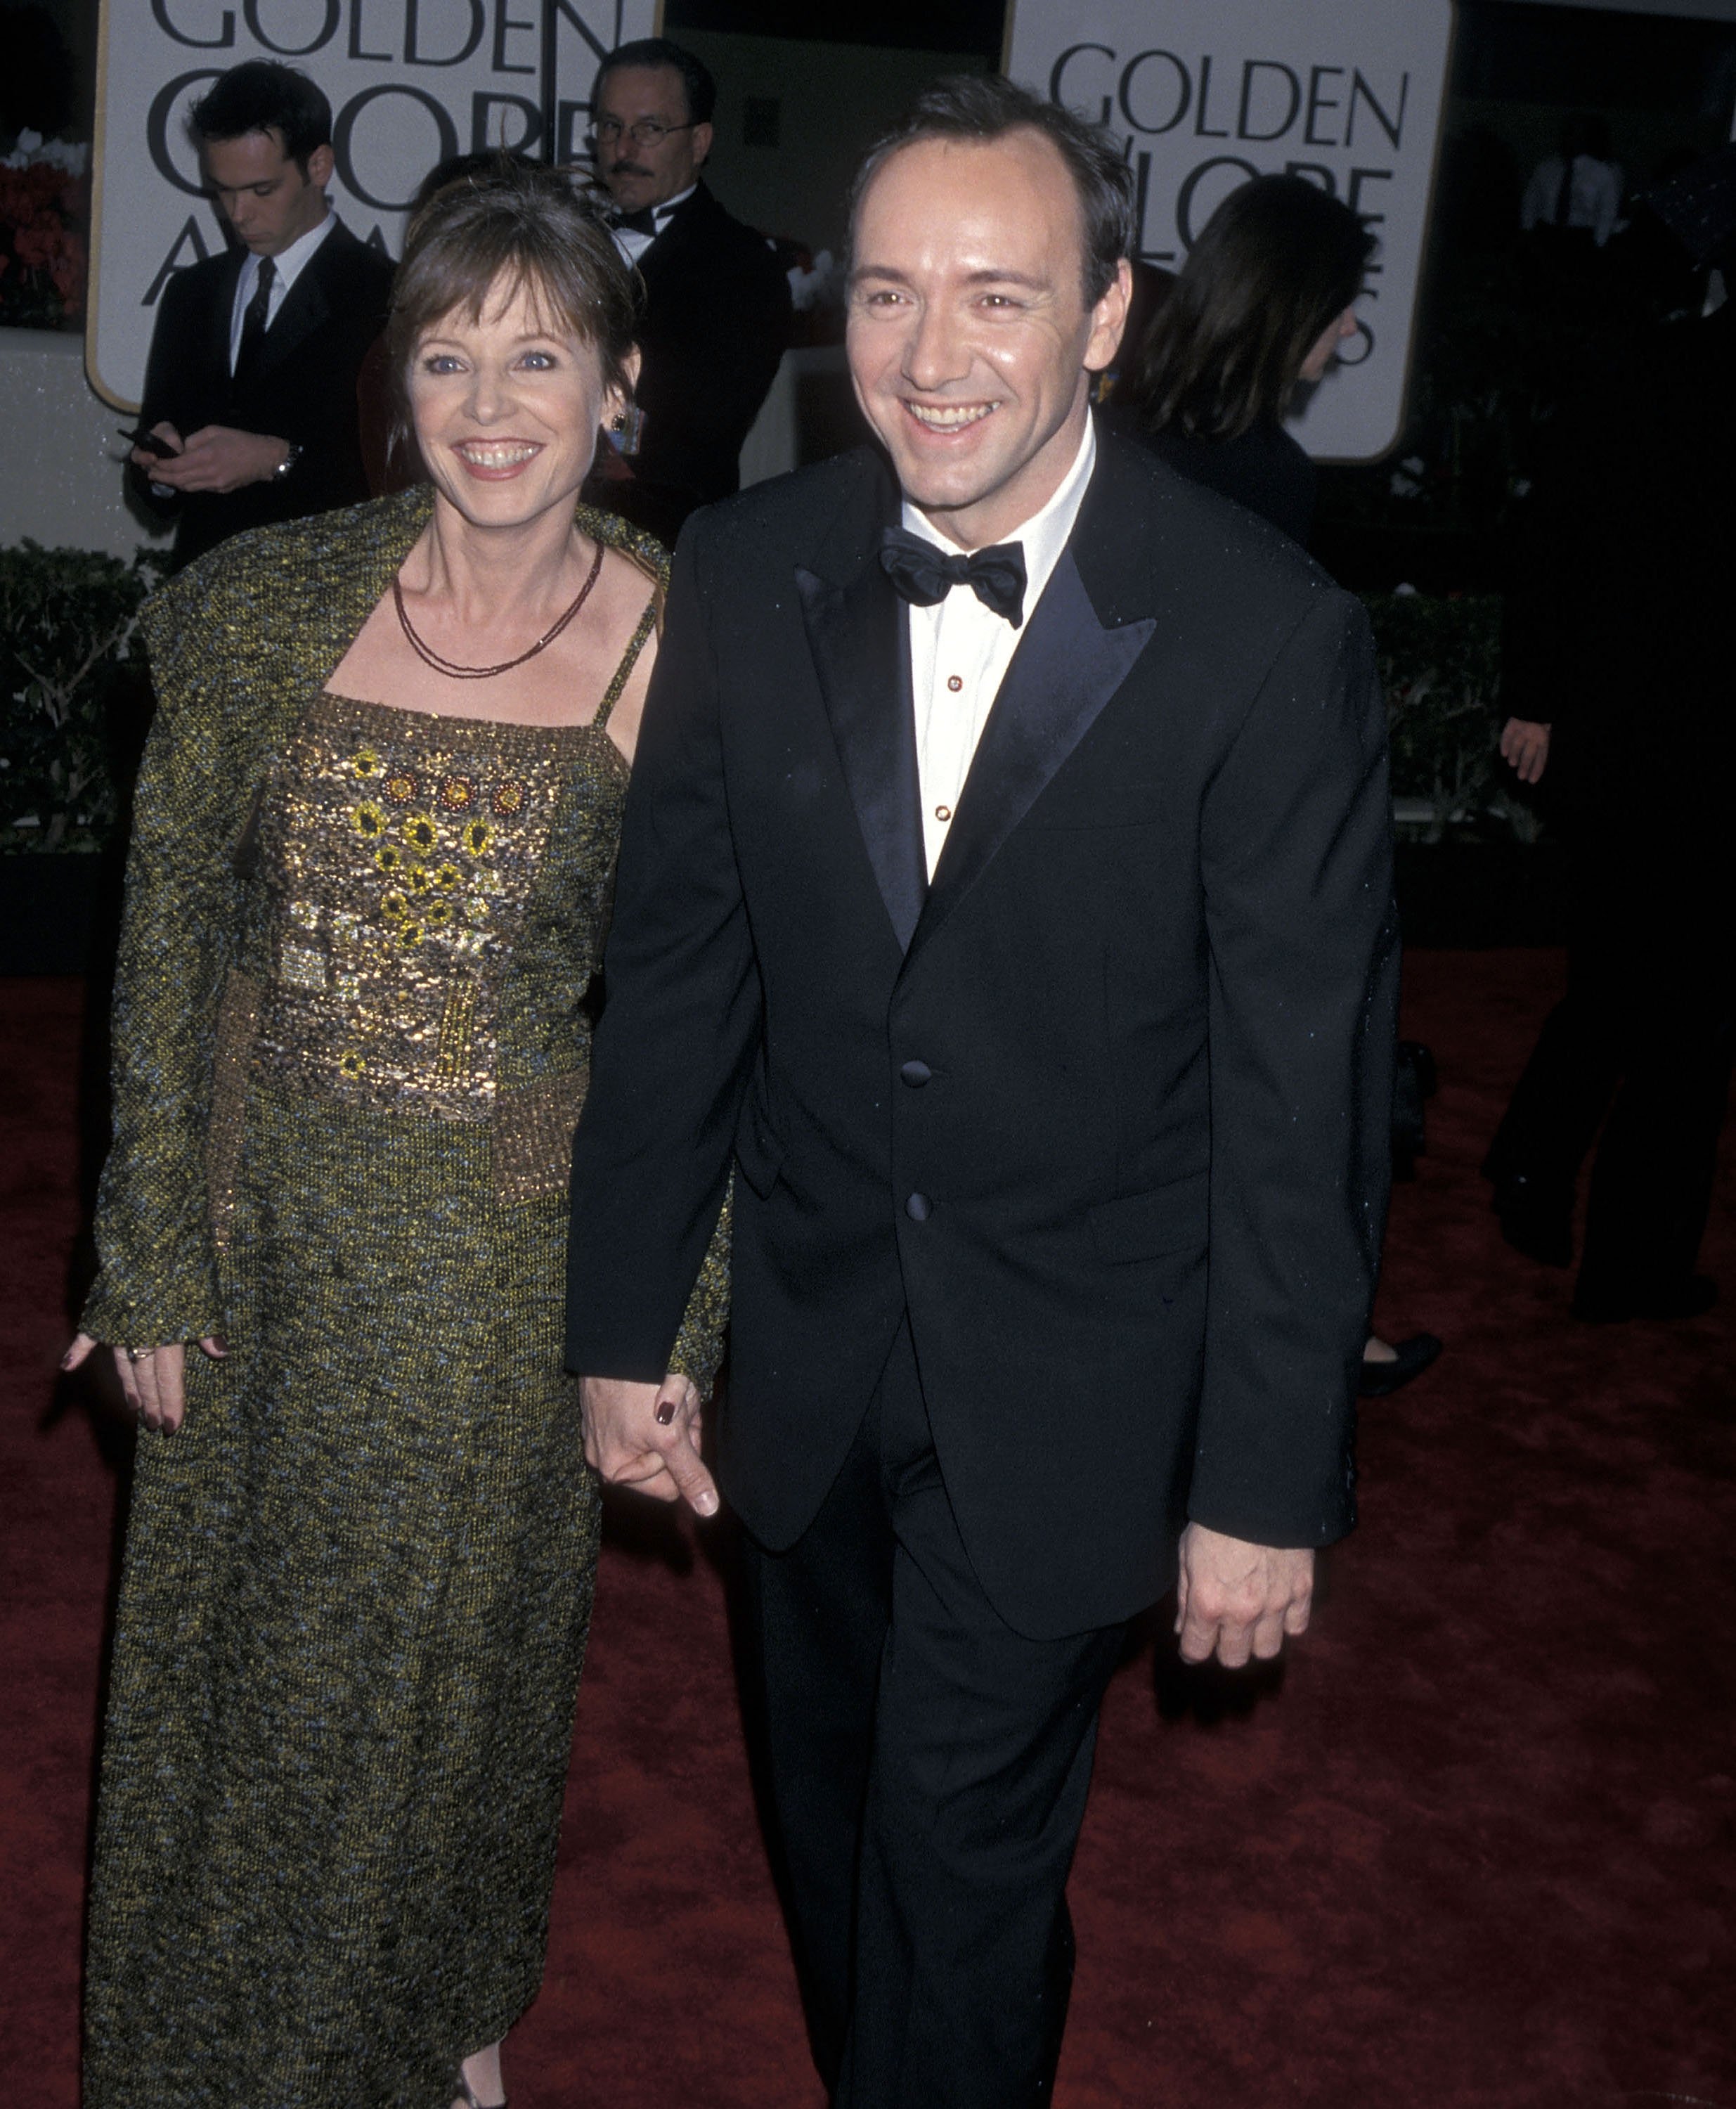 Dianne Dreyer and Kevin Spacey attend the 57th Annual Golden Globe Awards on January 23, 2000 at Beverly Hilton Hotel in Beverly Hills, California | Source: Getty Images 